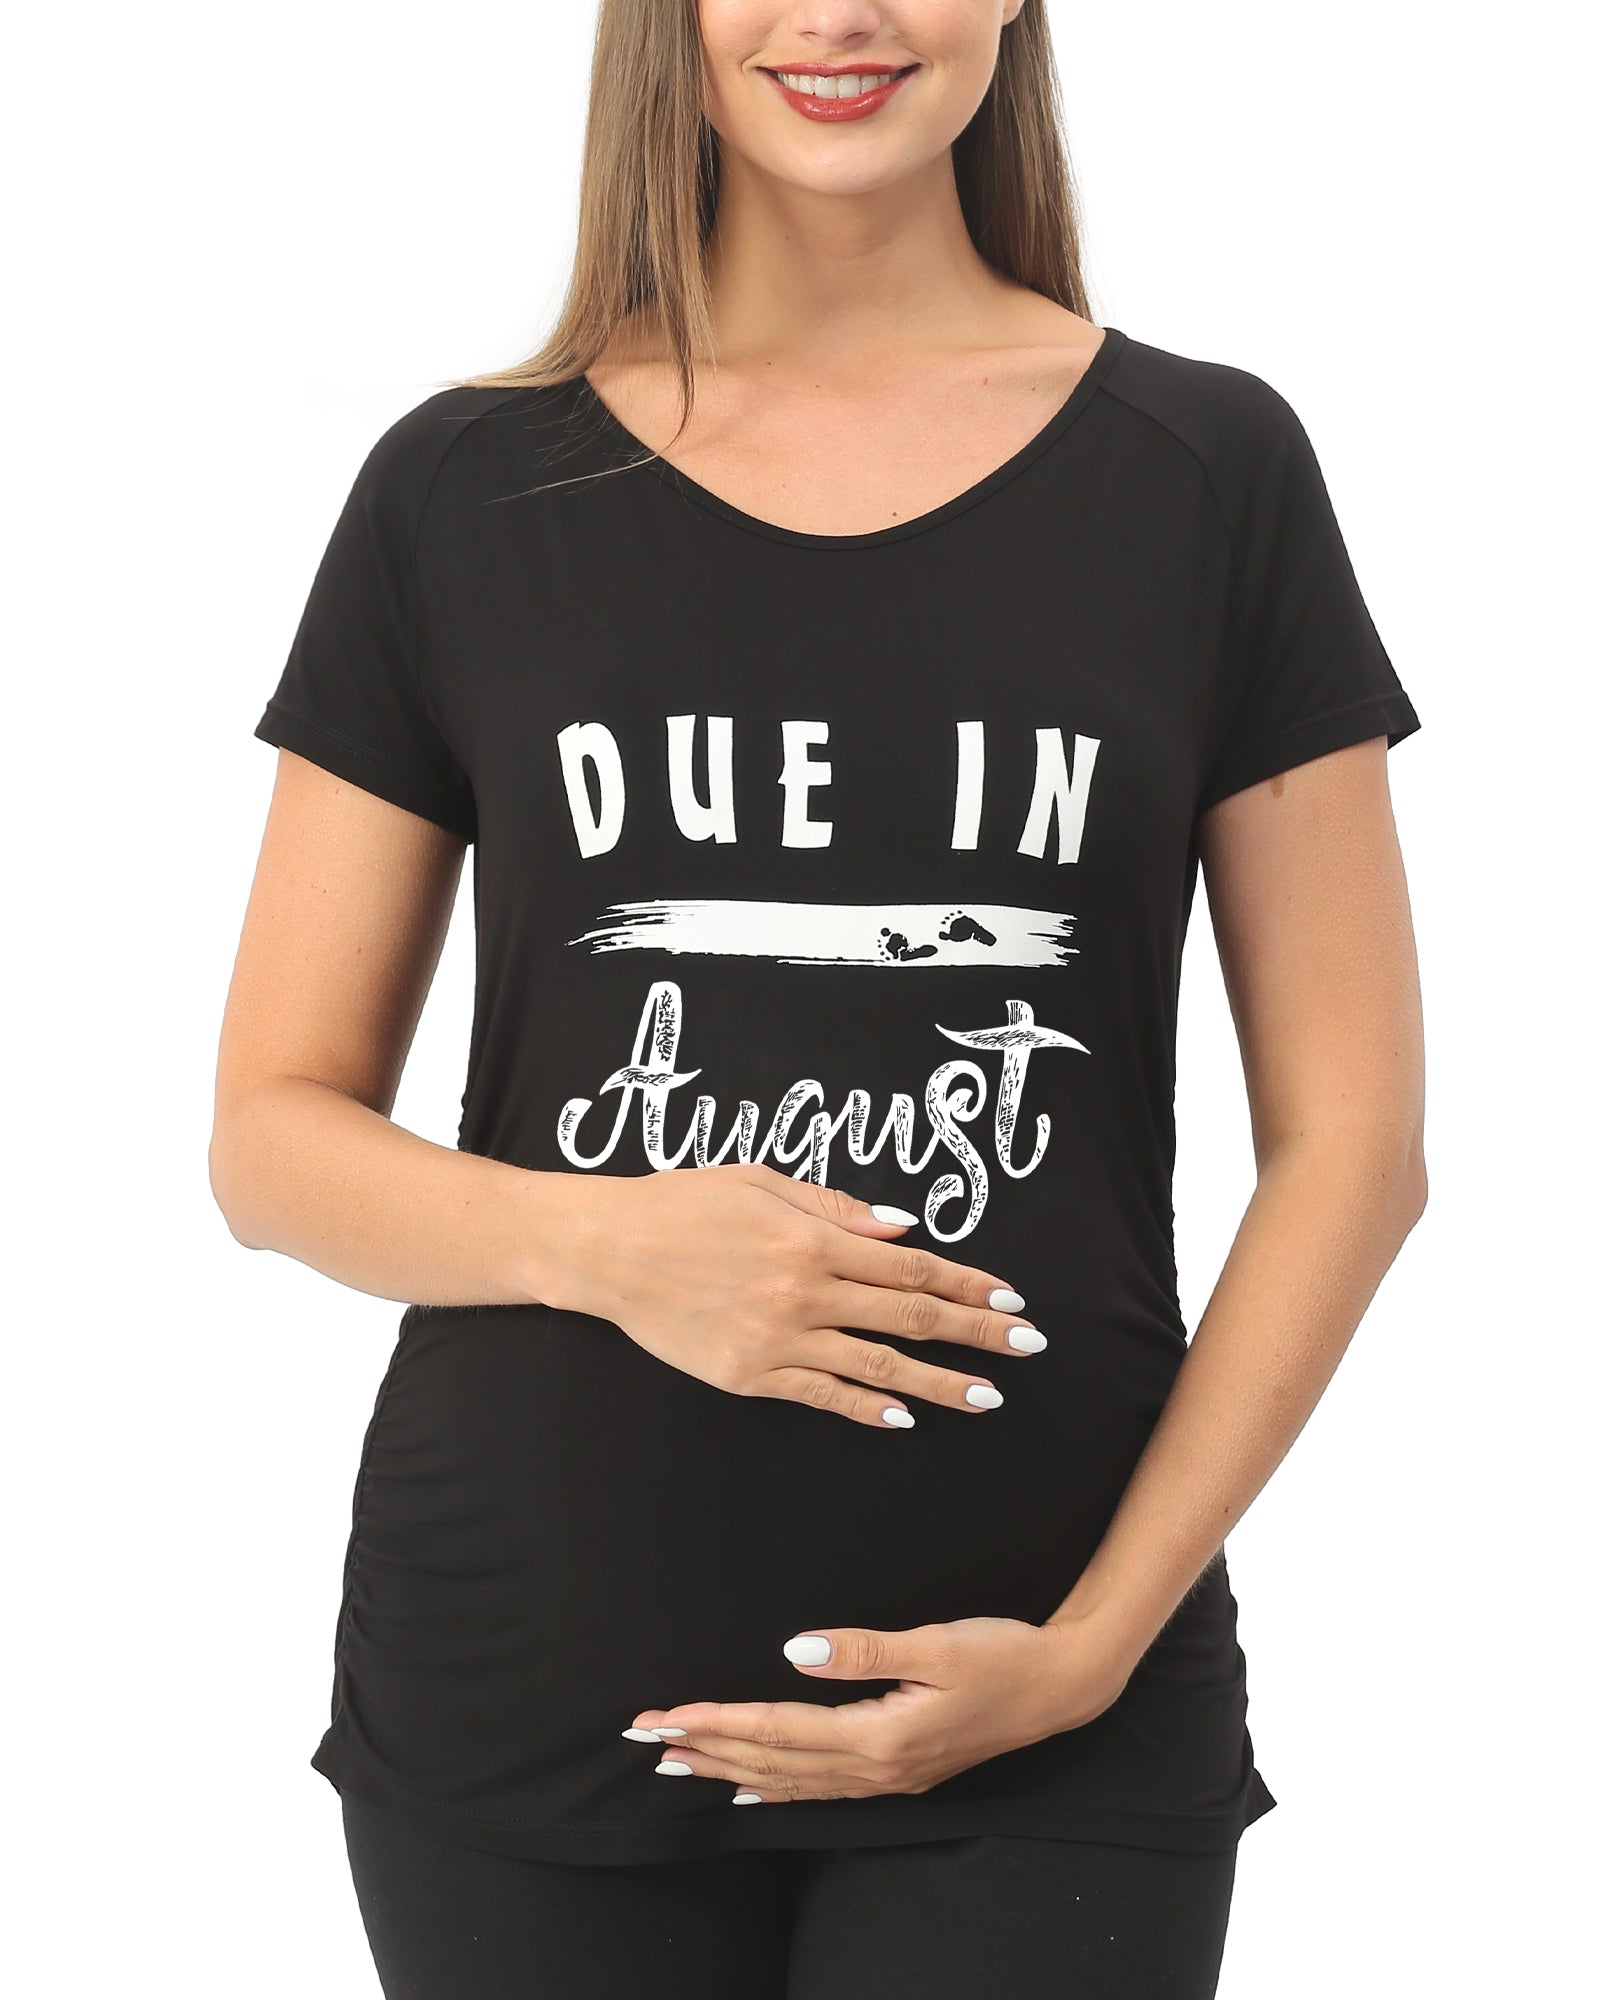 Due in Graphic Maternity Shirts,August